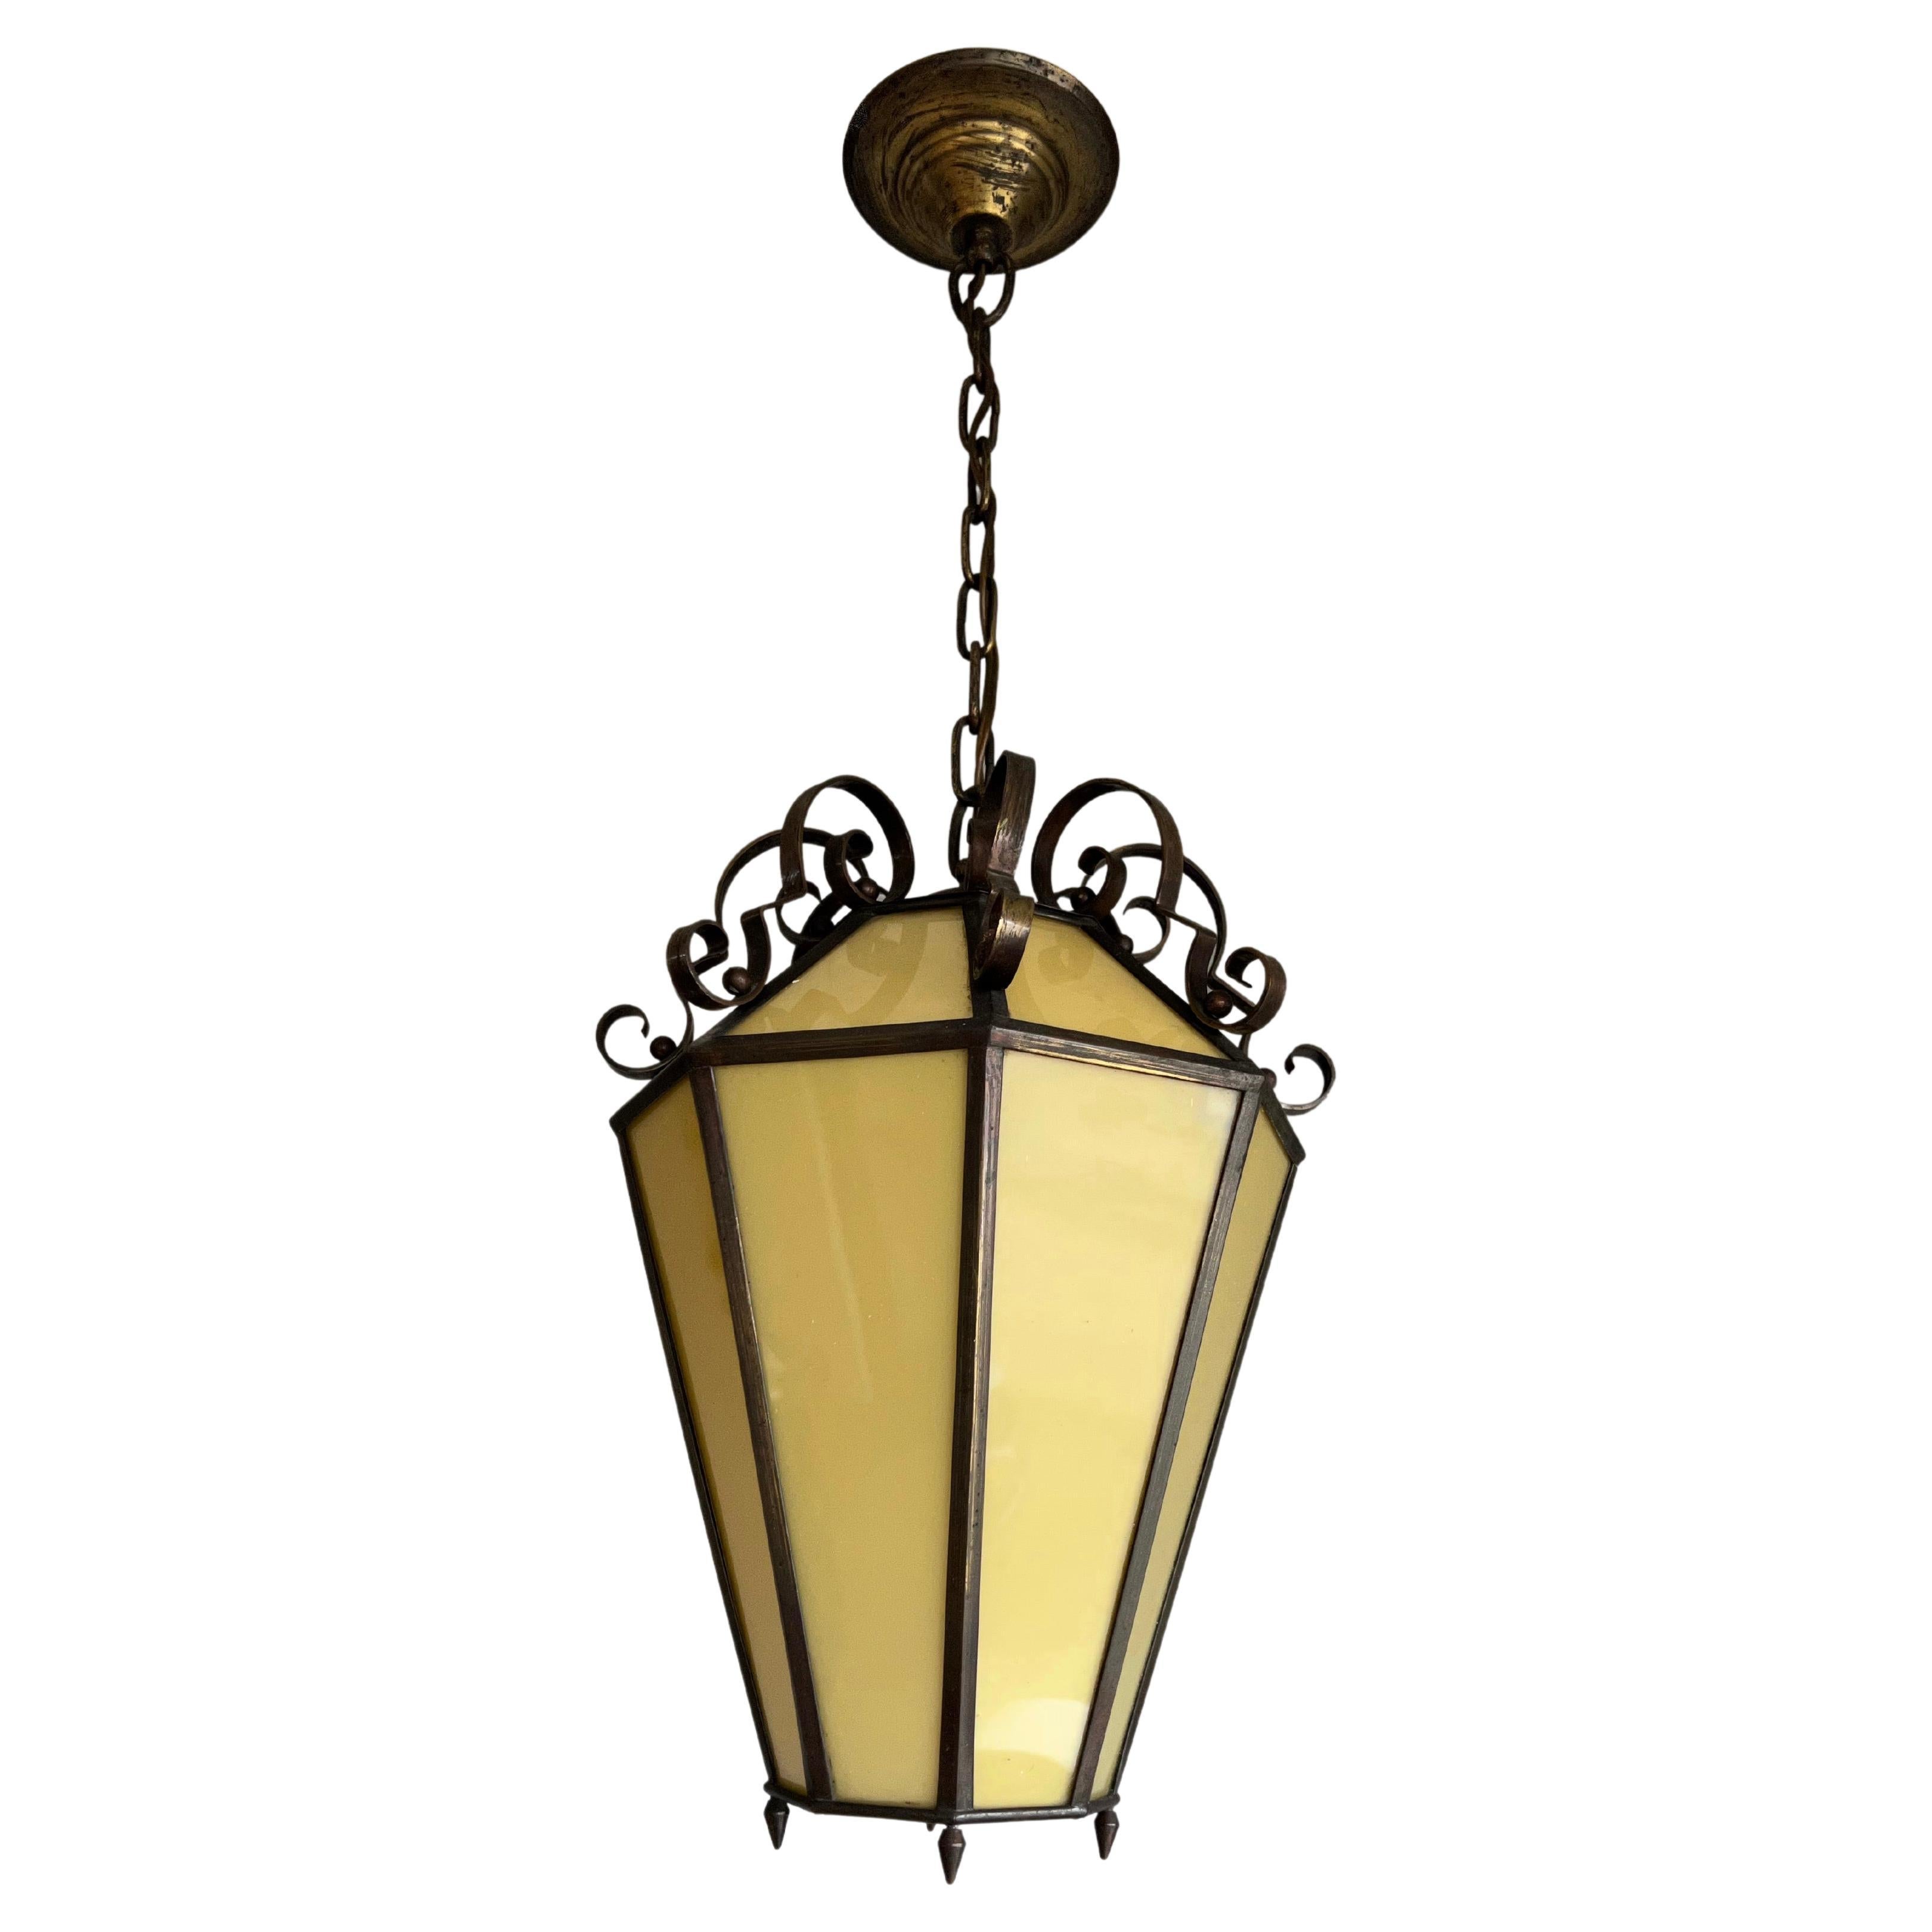 Handcrafted and stylish, Italian made pendant with 16 colored art glass panels.

If you are looking for a unique and stylish lantern-like pendant to grace your entry hall or landing then this handcrafted octagonal specimen from early twentieth